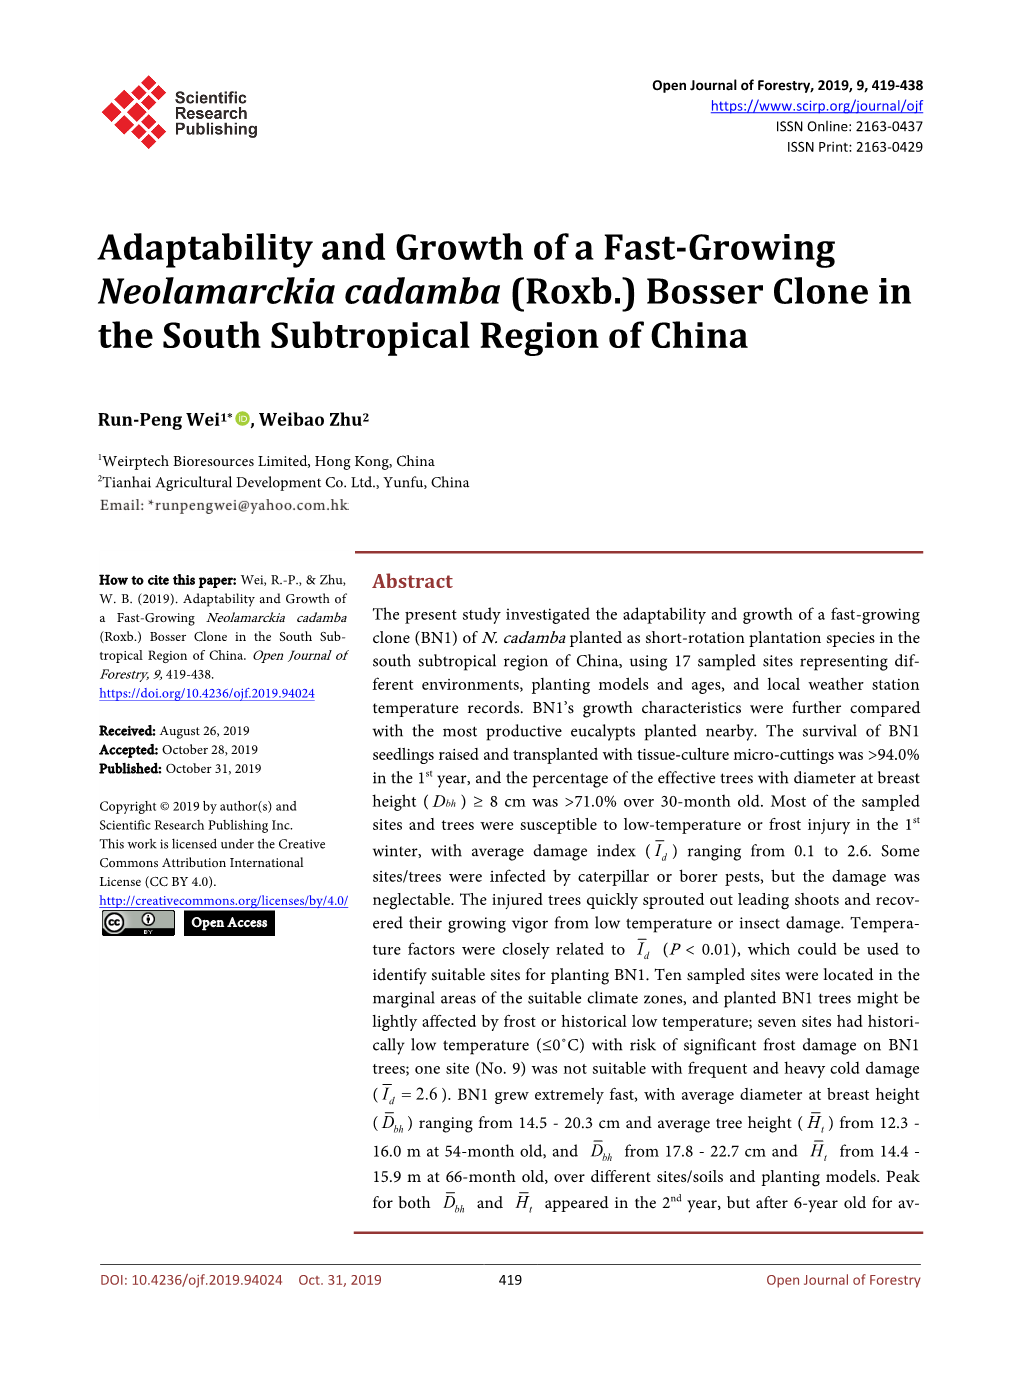 Adaptability and Growth of a Fast-Growing Neolamarckia Cadamba (Roxb.) Bosser Clone in the South Subtropical Region of China